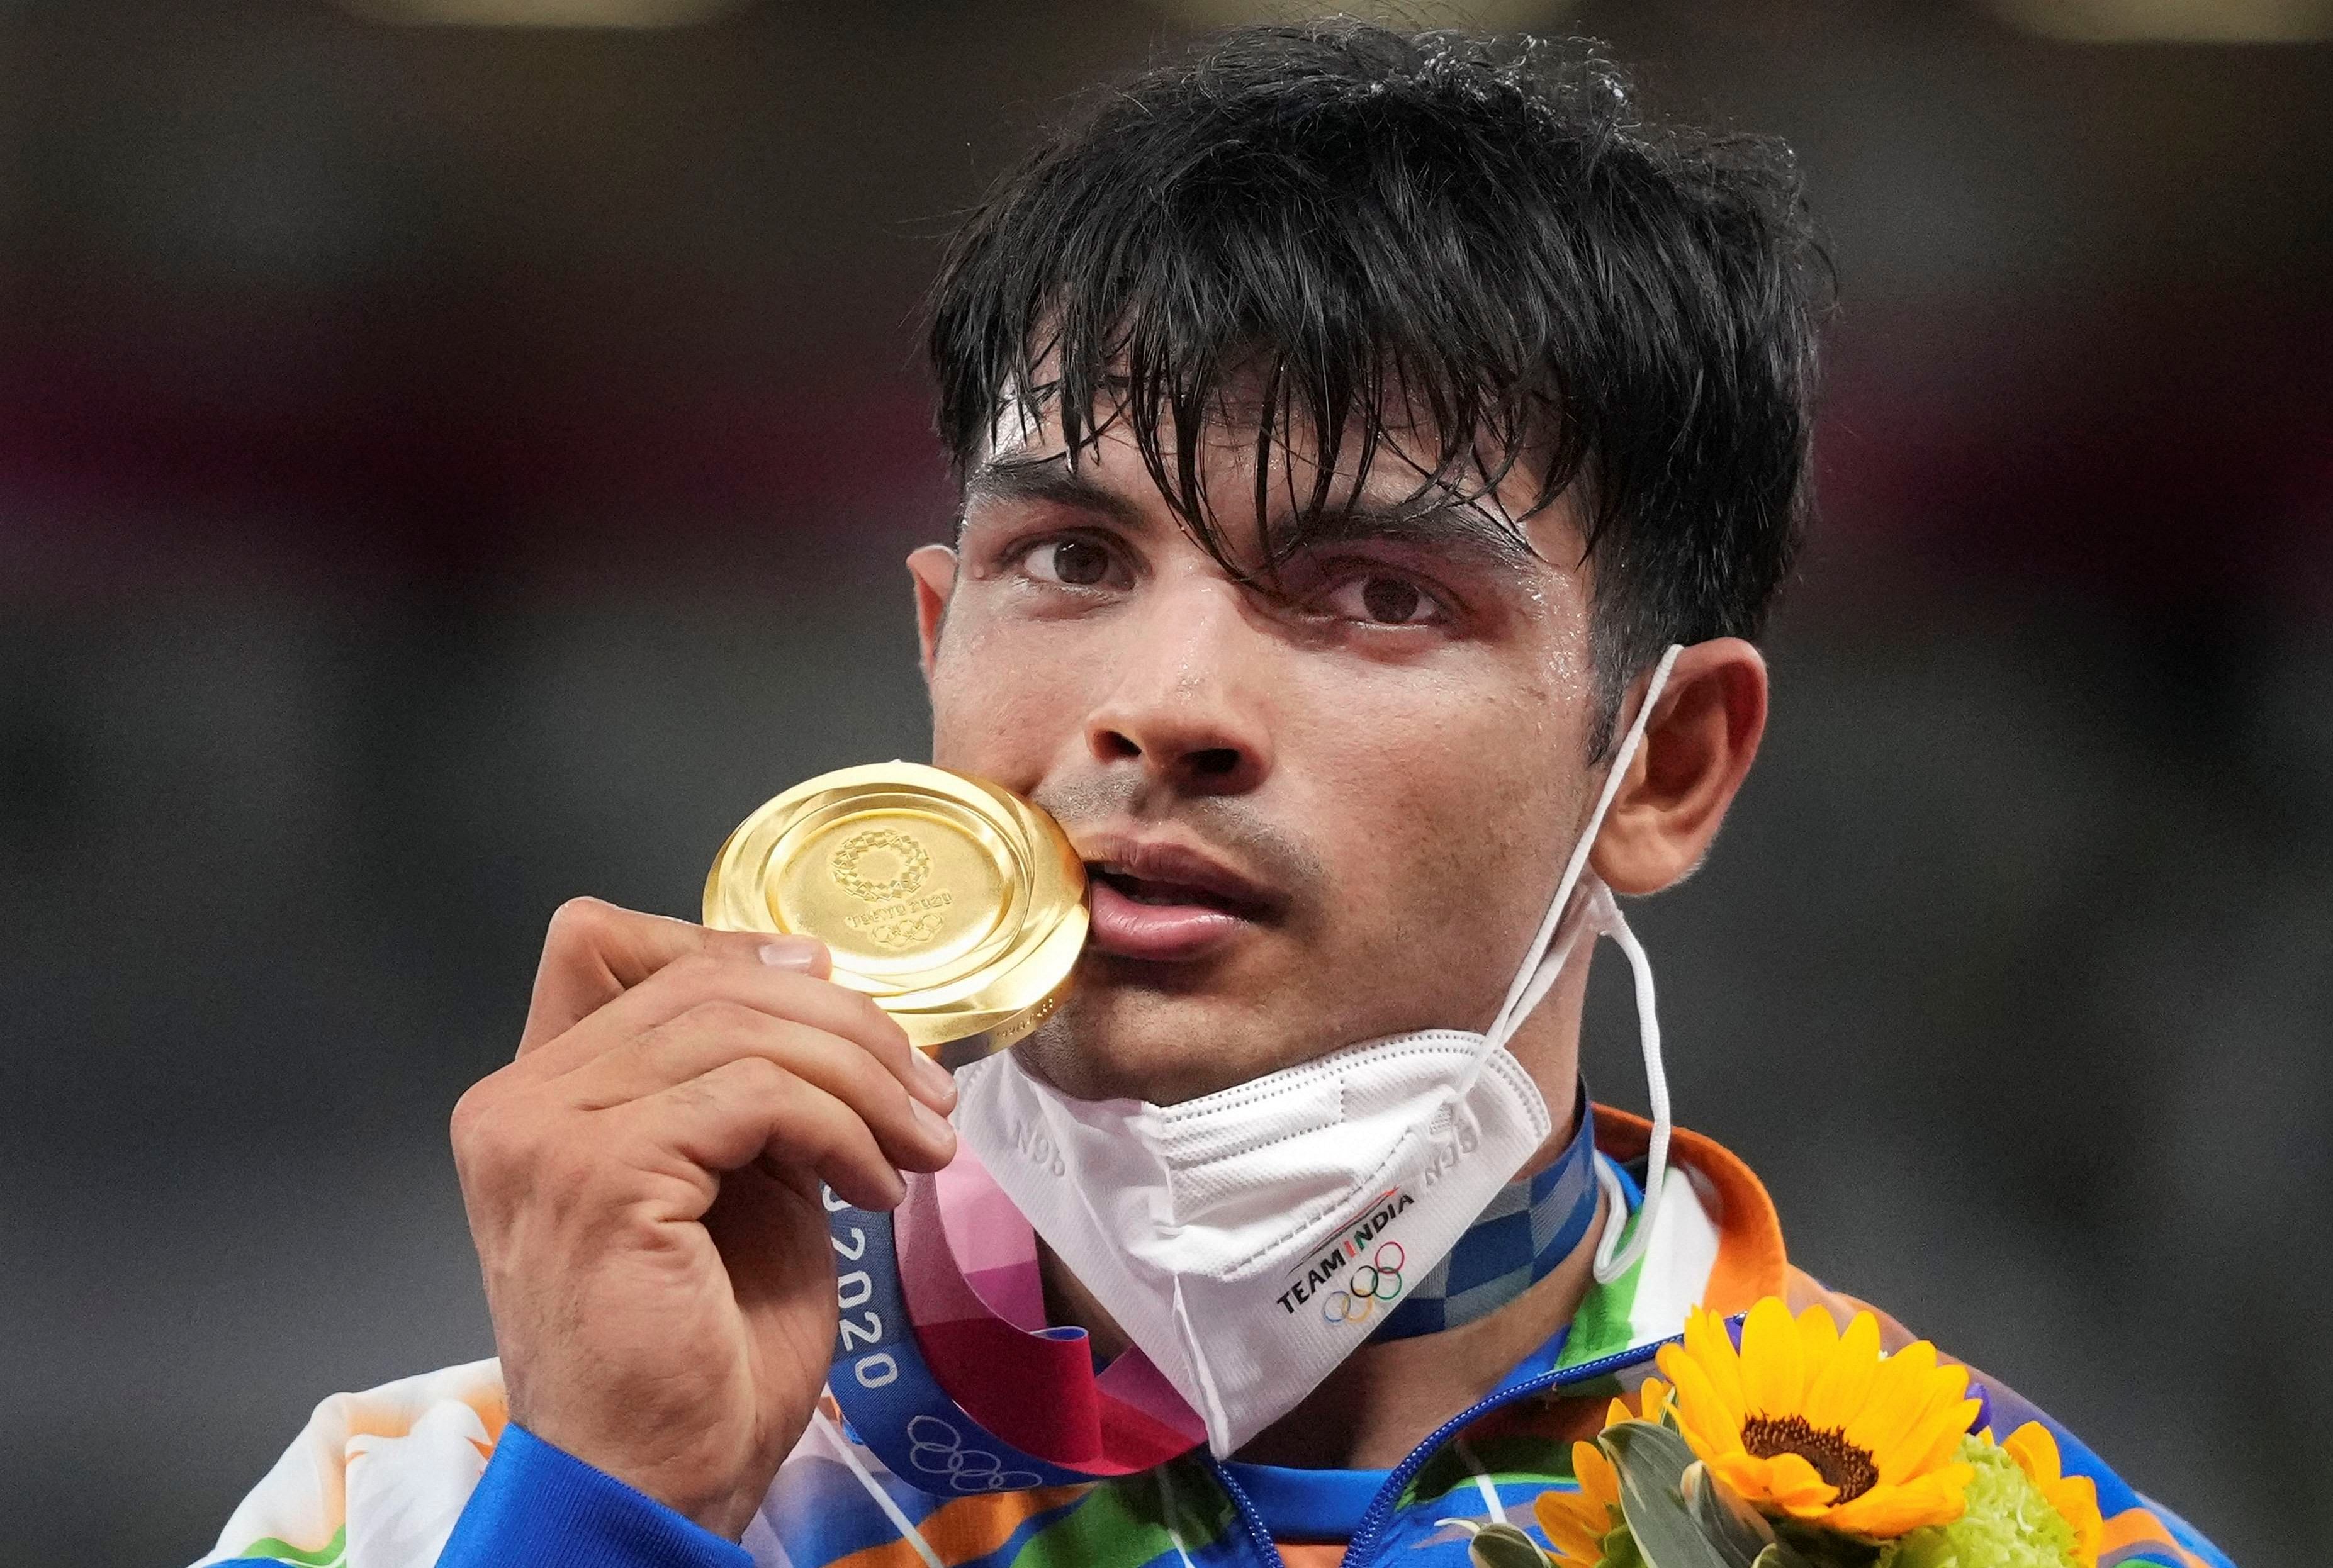 'Feels unbelievable, didn't know it would be gold' — Neeraj Chopra says